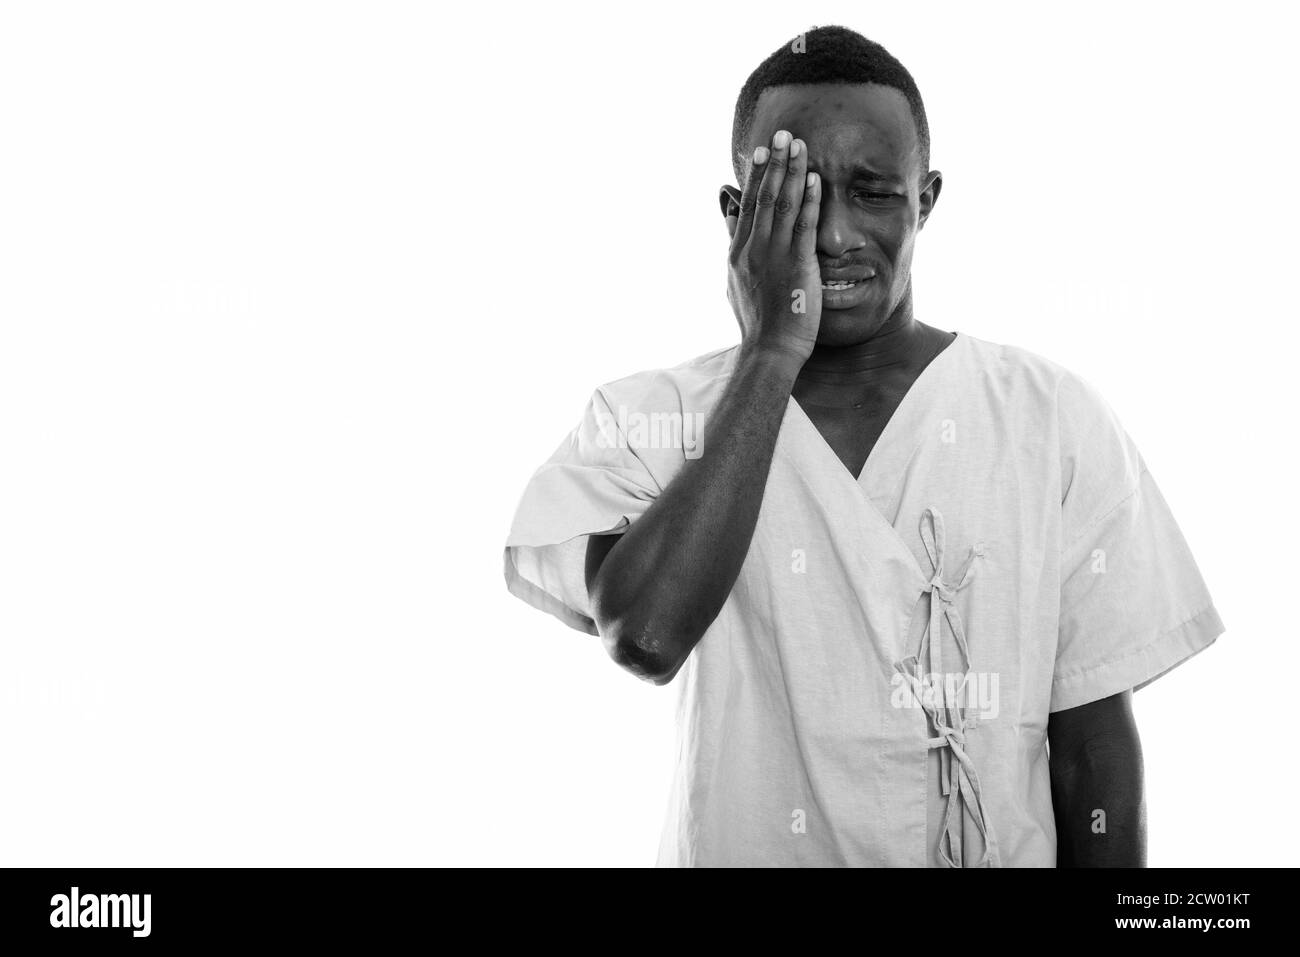 Studio shot of young black African man patient looking sad while covering face Stock Photo